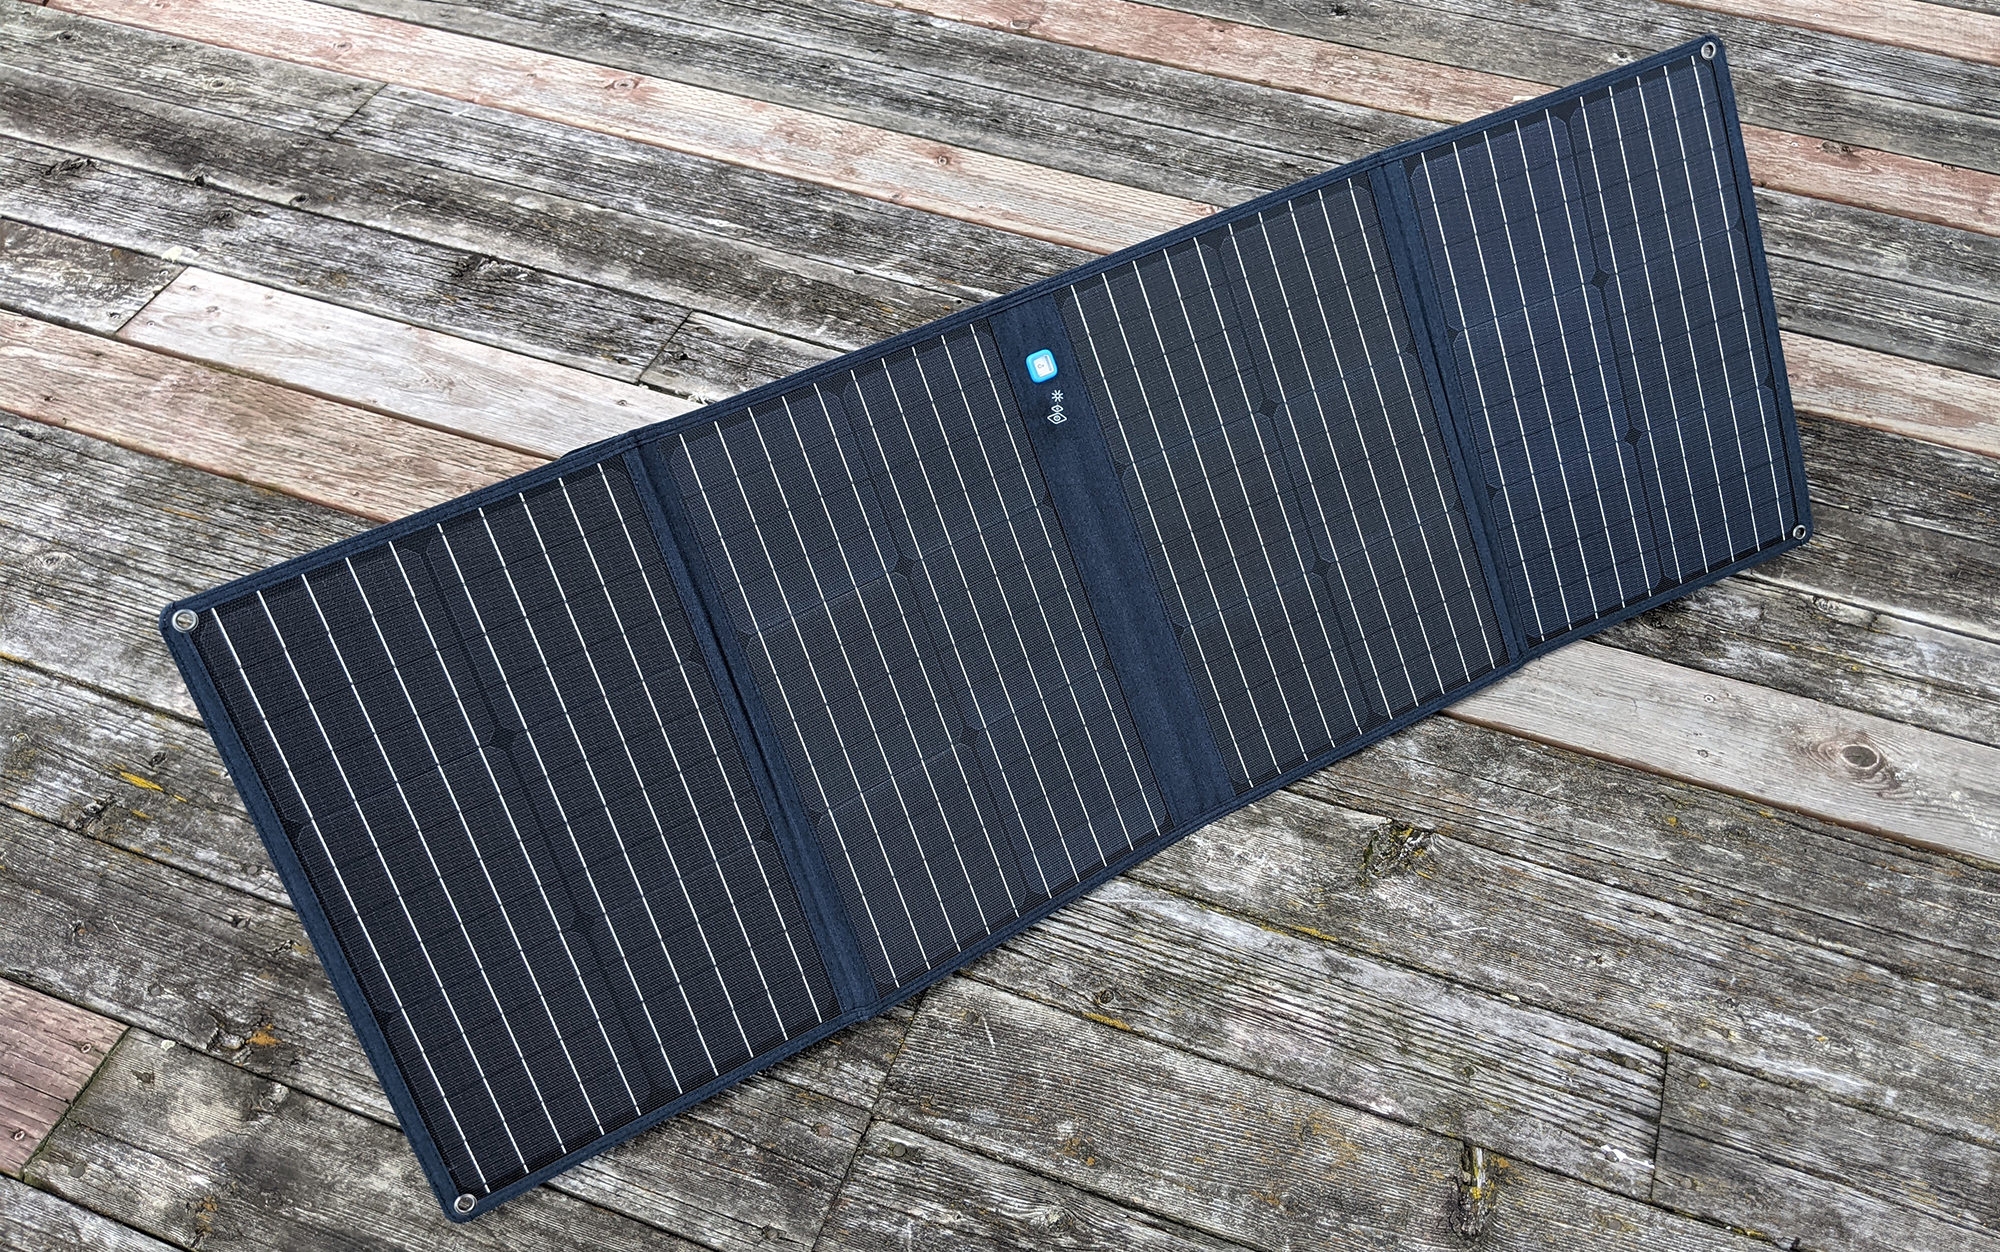 The Anker 625 Solar Panel provides serious power at an approachable price point.